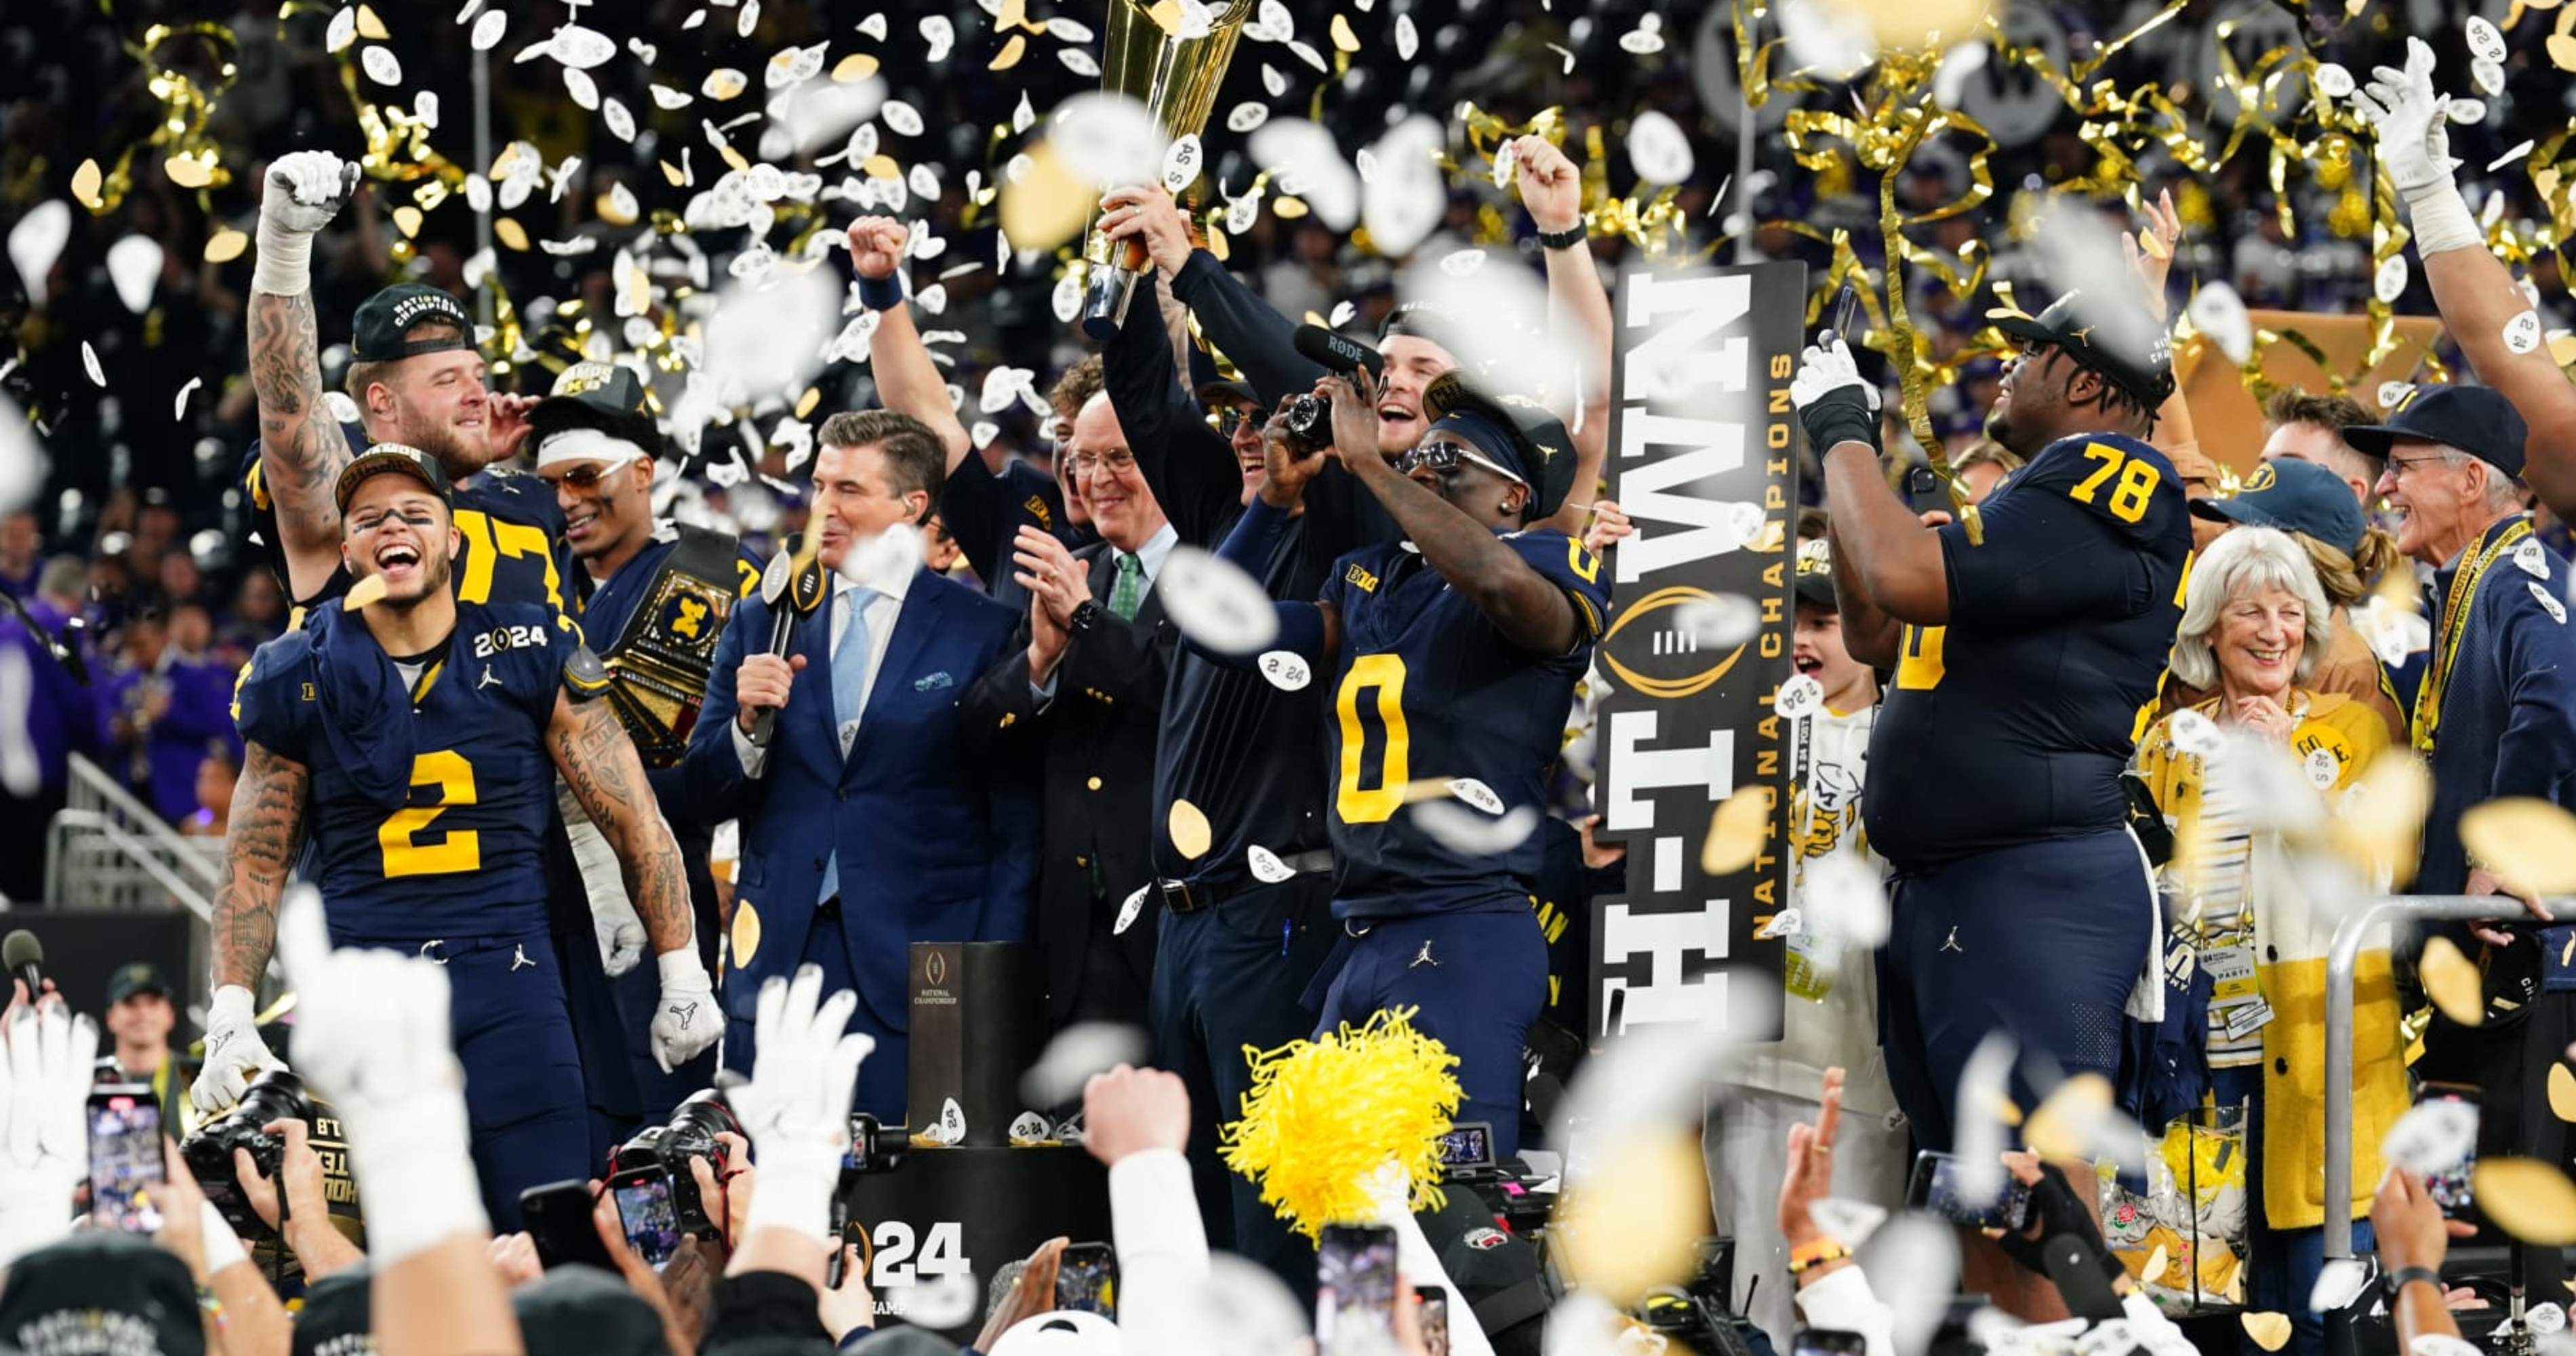 College Football Playoff, ESPN Agree to 6-Year Contract Extension amid Expansion